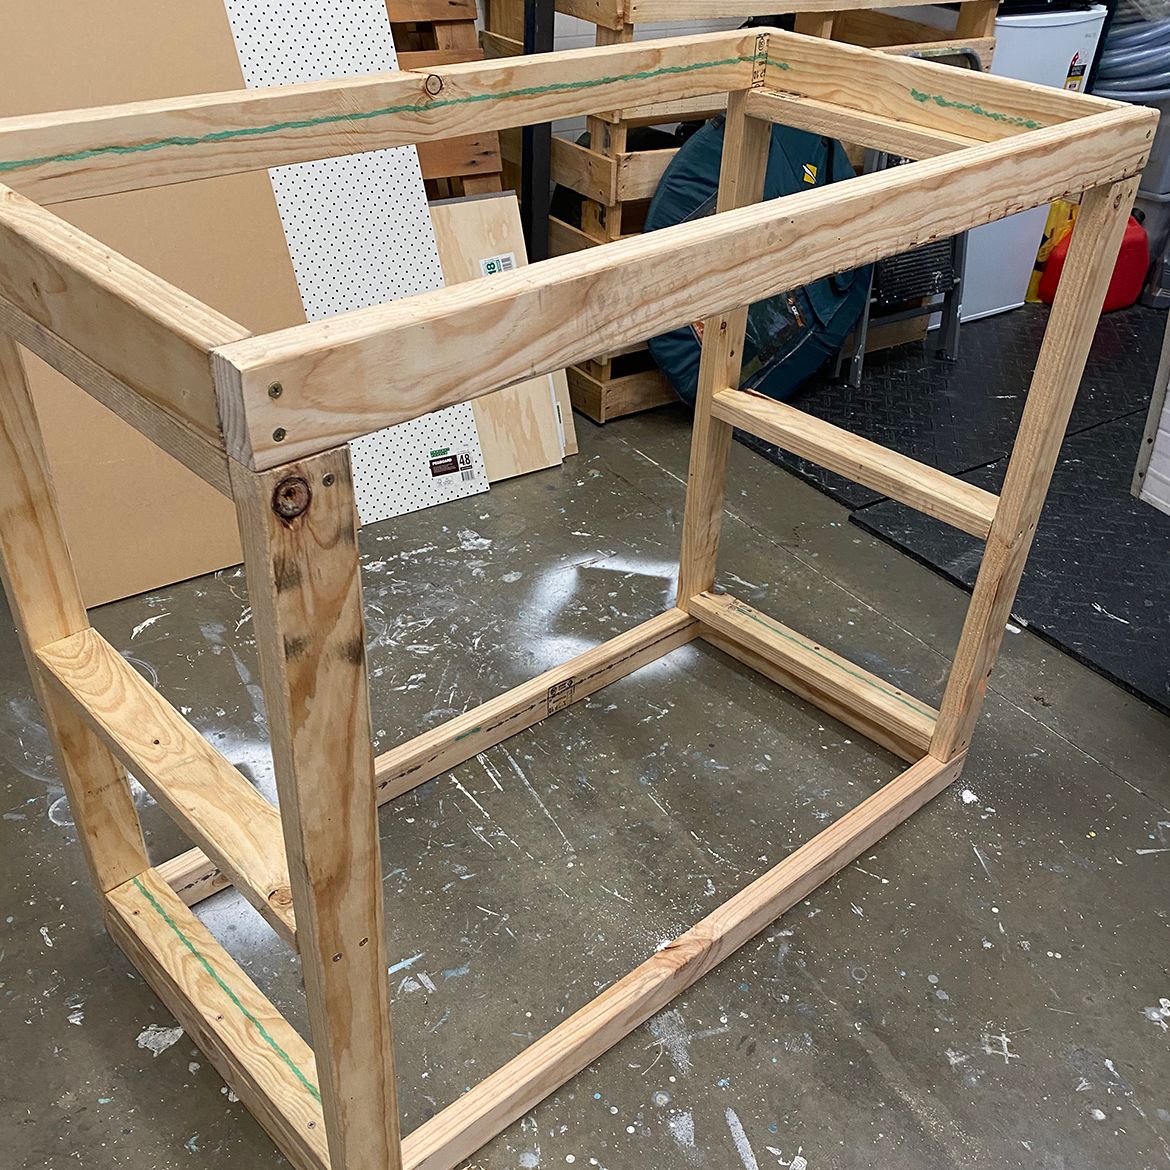 How to build a workbench | Bunnings Workshop community